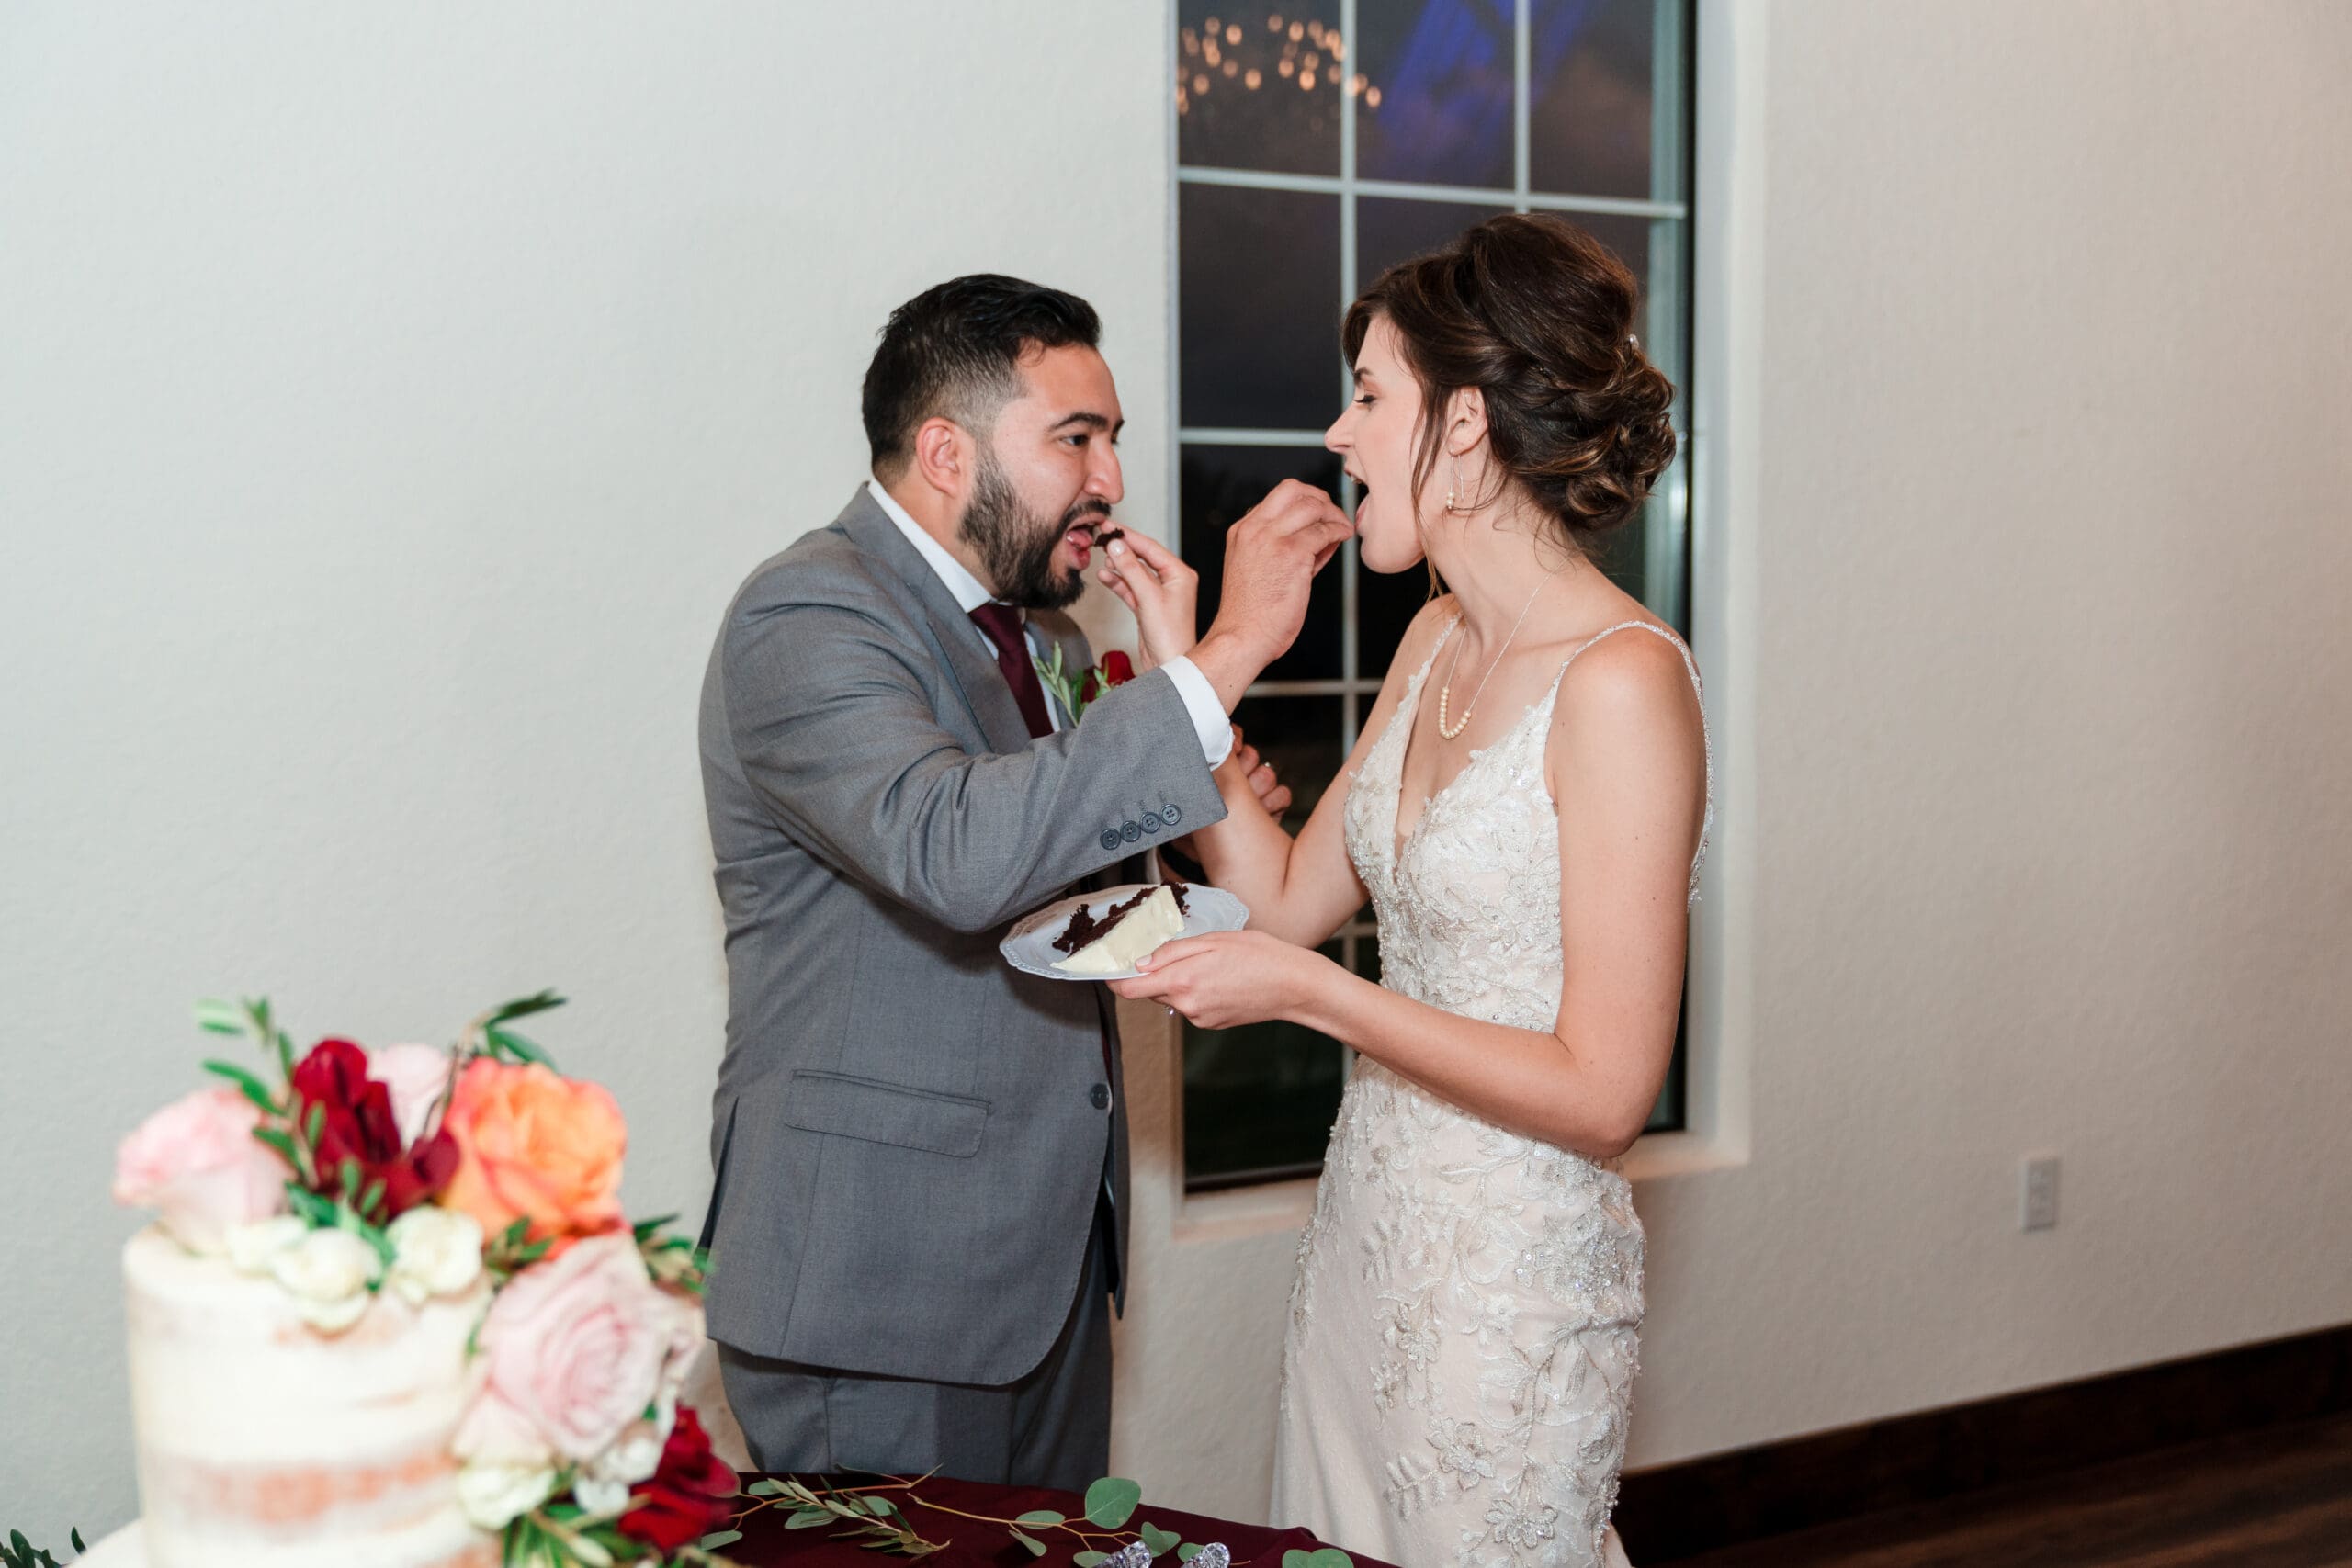 Bethany and Jonah feeding each other the first bites of their wedding cake simultaneously at the Sterling Event Venue Reception Center.